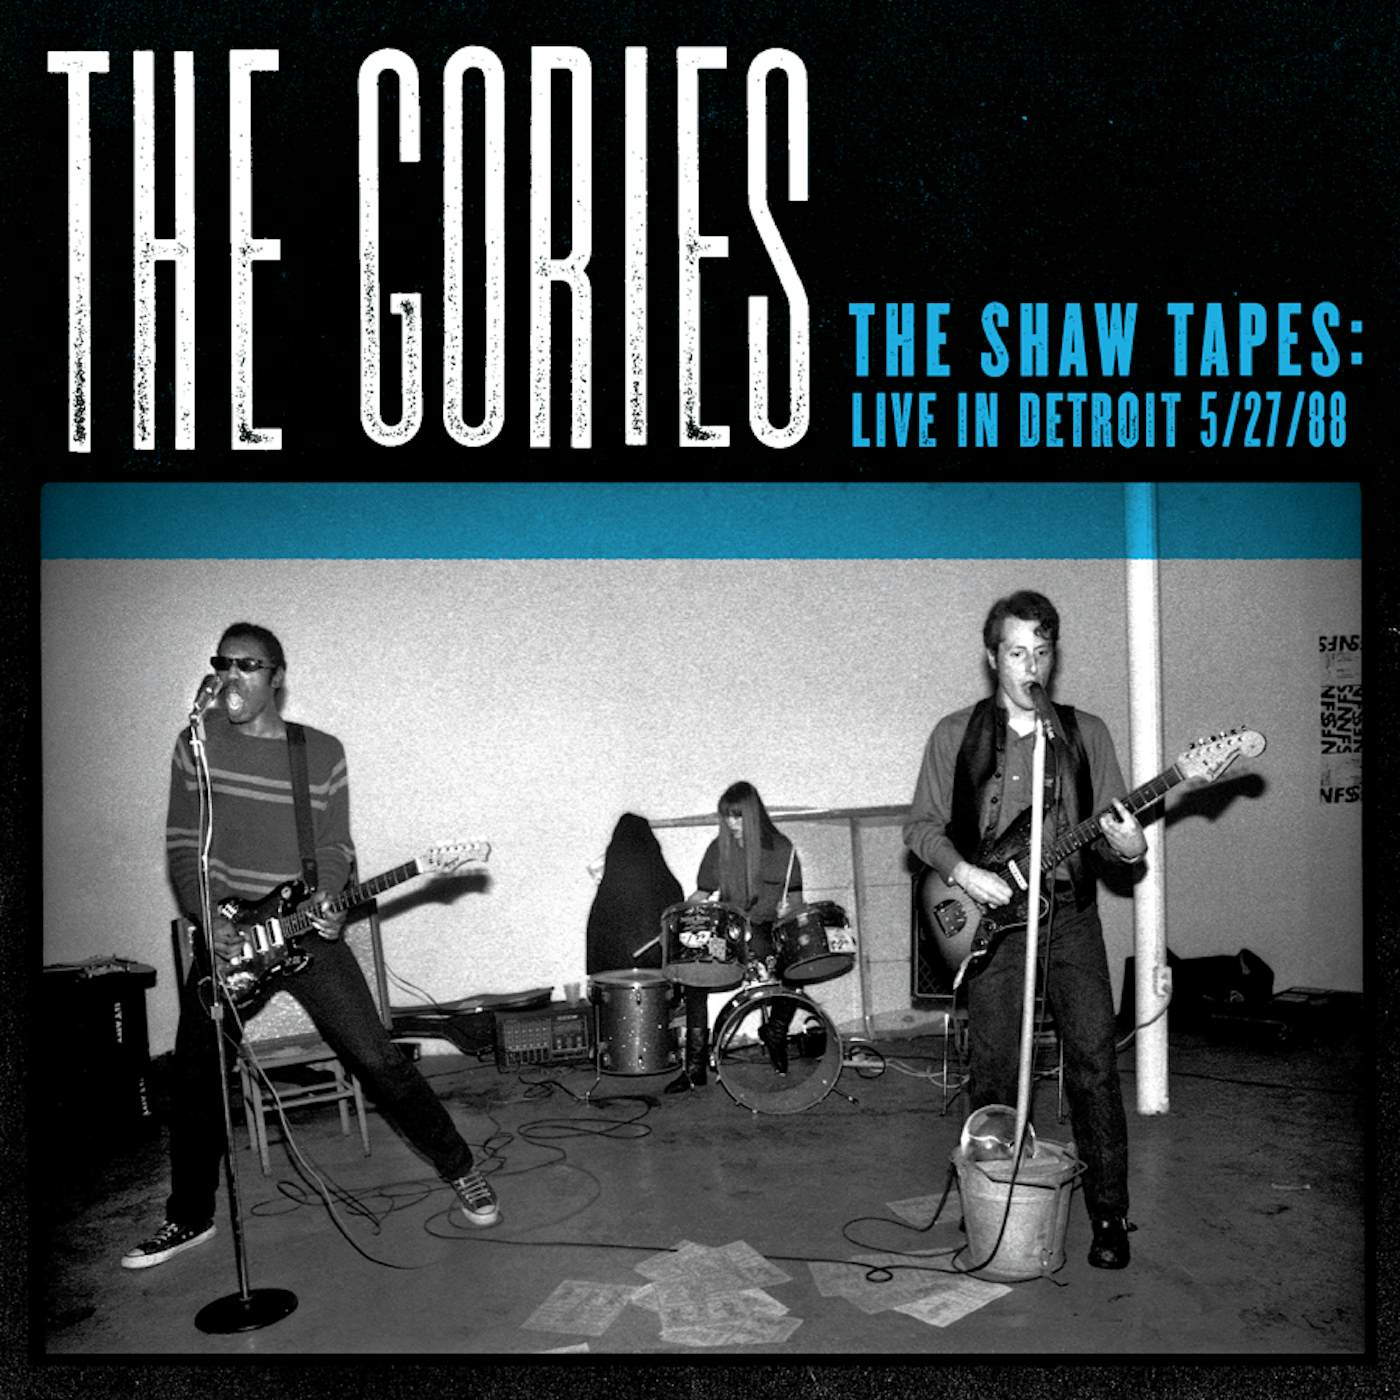 The Gories SHAW TAPES: LIVE IN DETROIT 5/27/88 CD